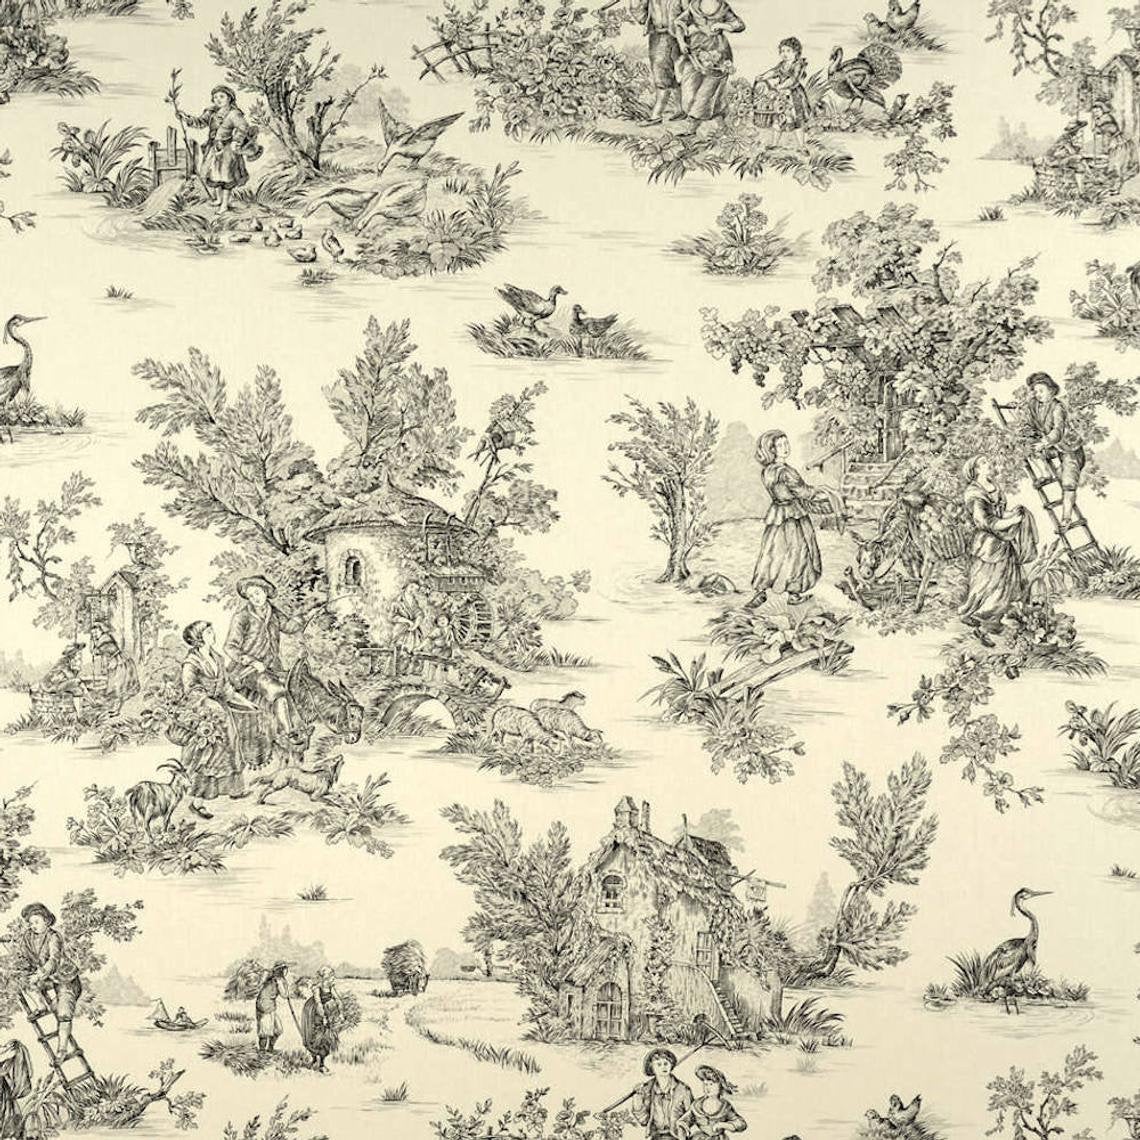 duvet cover in pastorale #1 black on cream french country toile